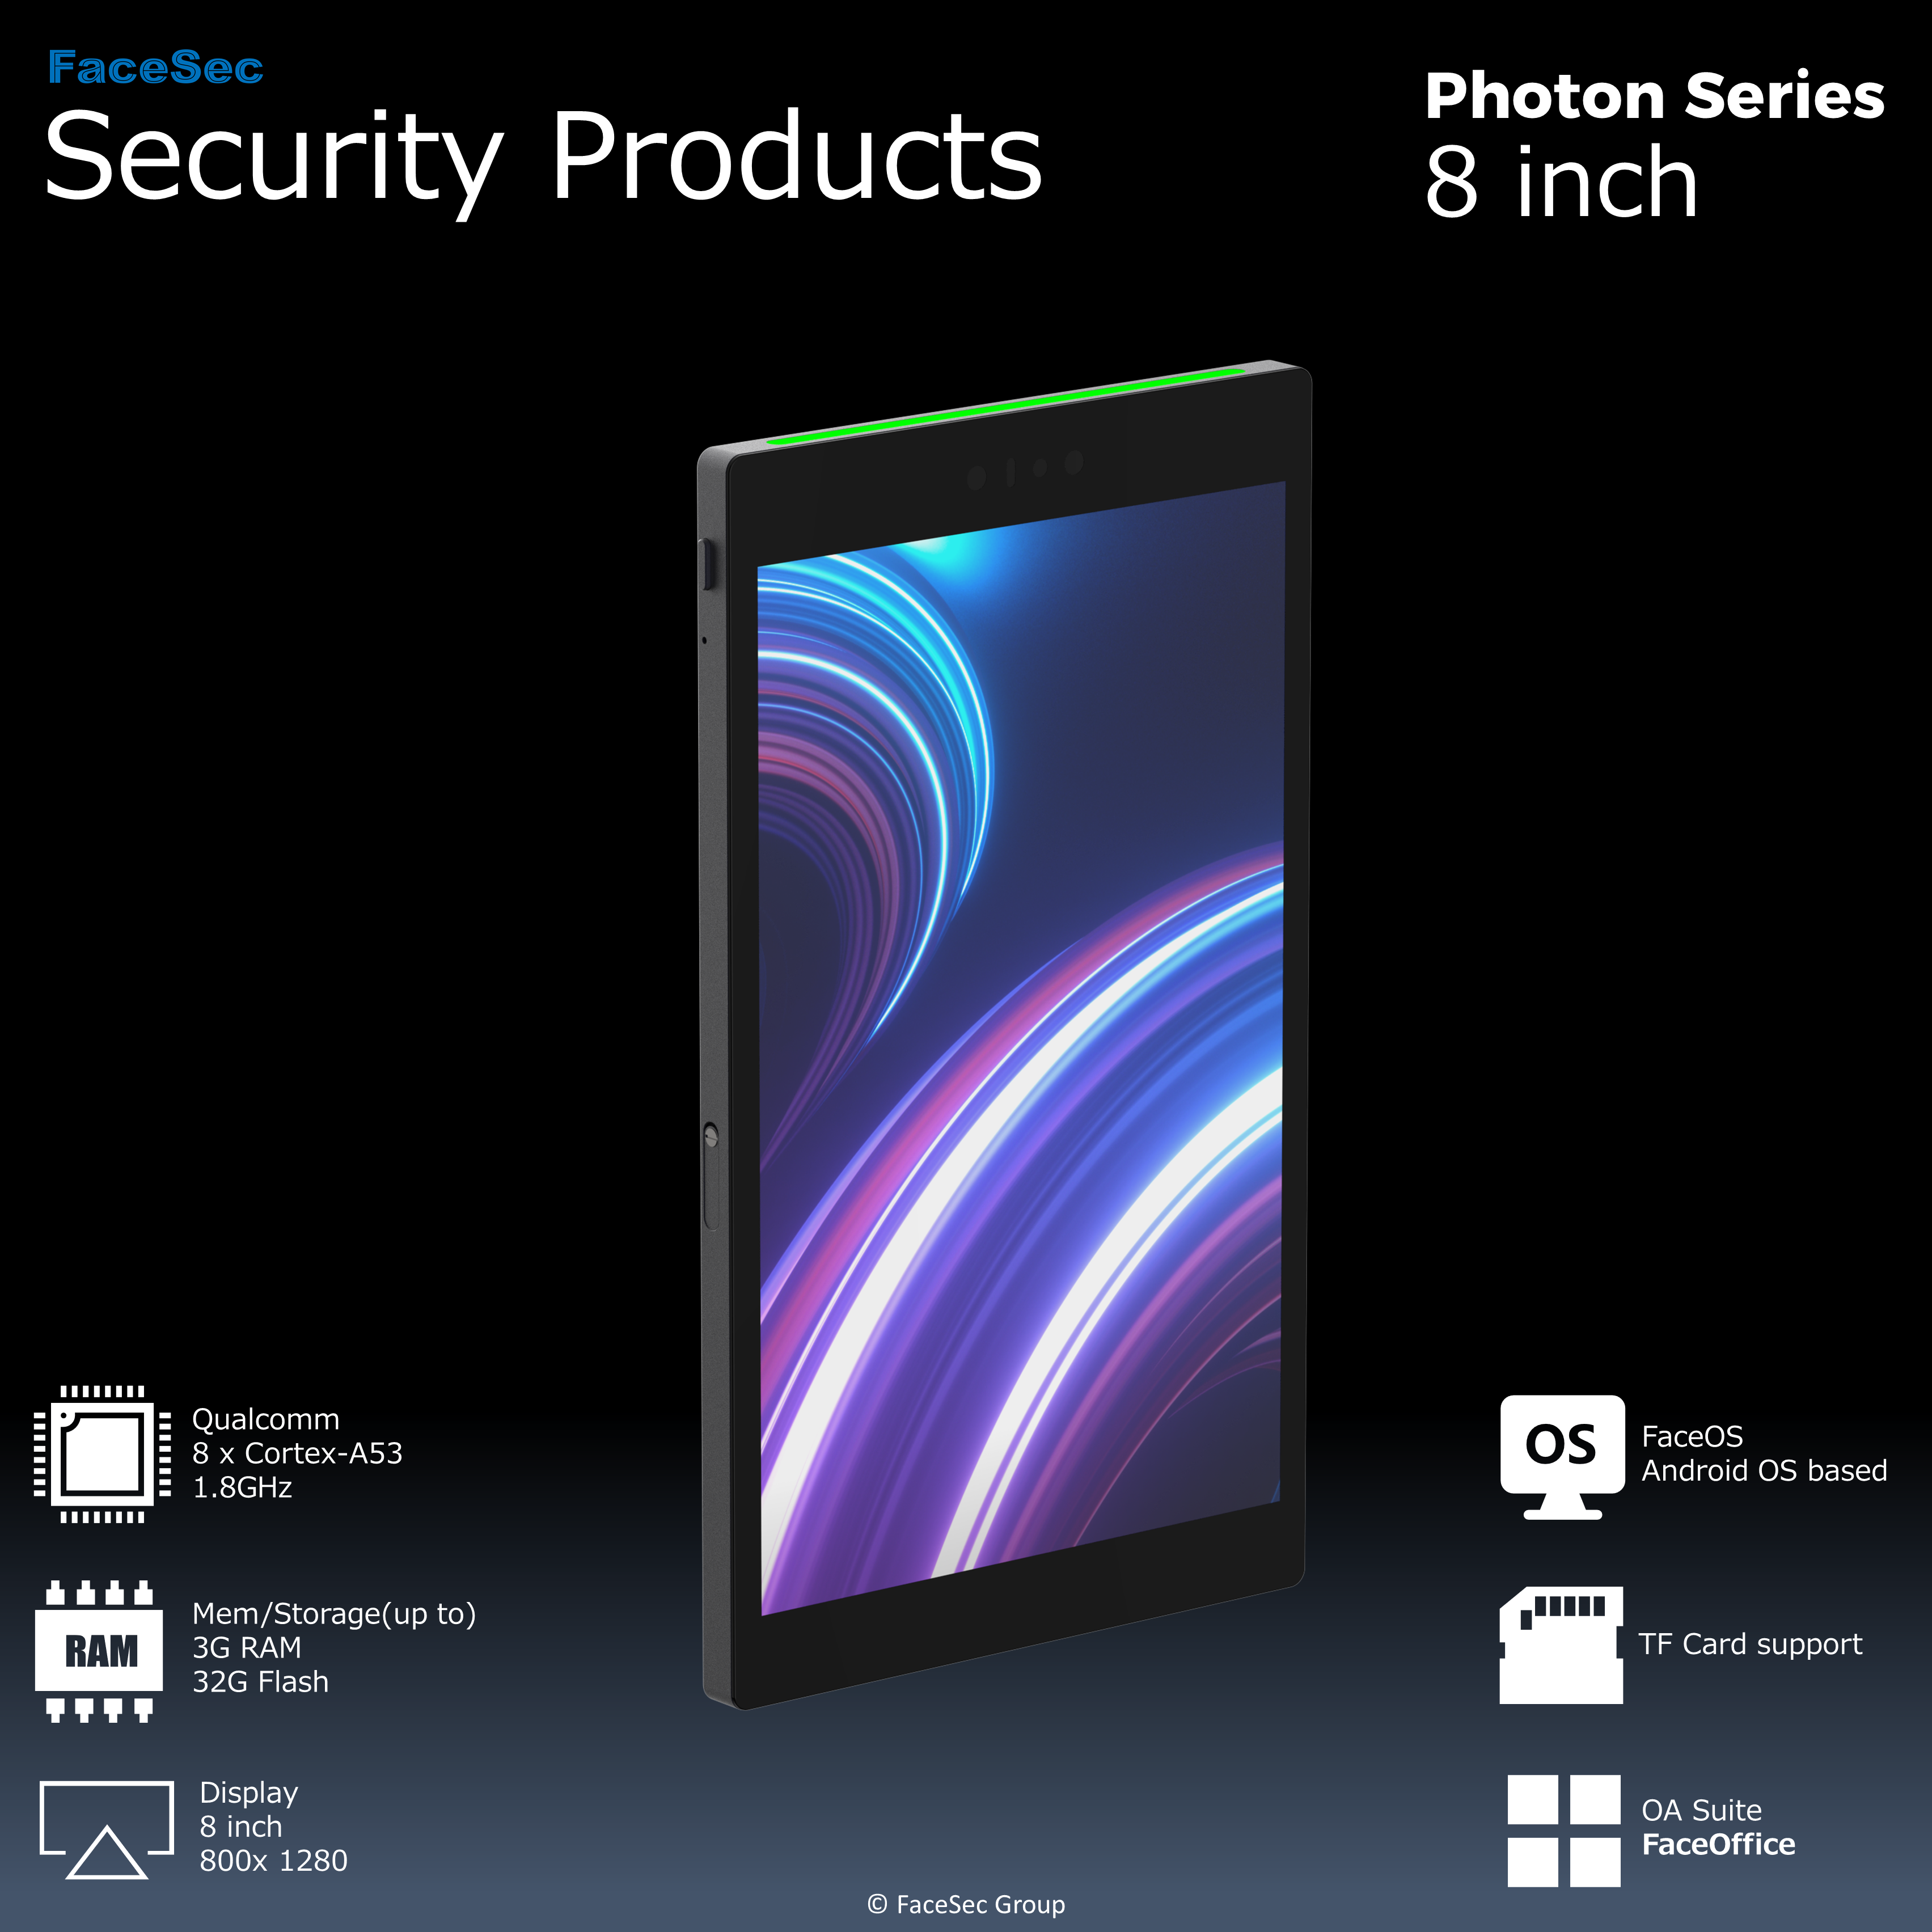 Photon Series 8inch(Security Products)